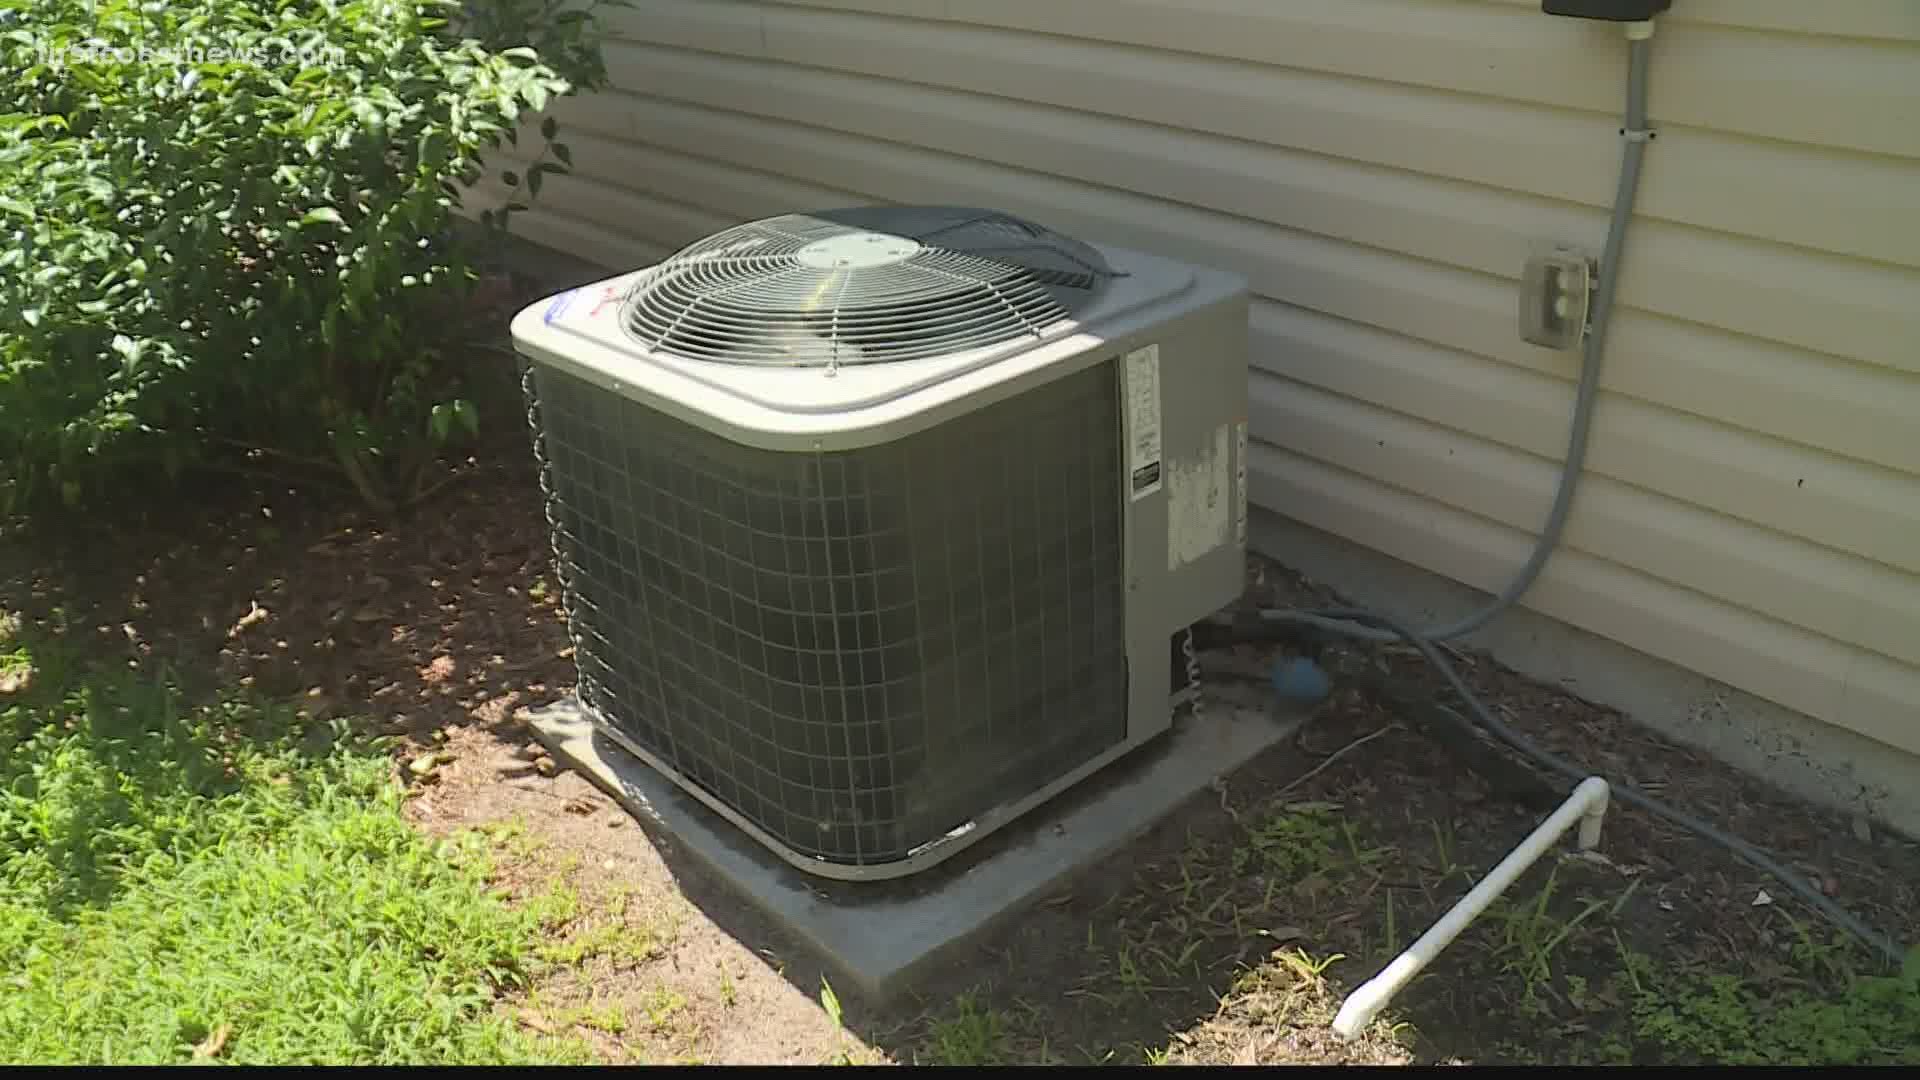 First Coast News called five other local heating and AC companies. Their costs ranged from $123 to $250 for the same service. The average total cost was $177.50.